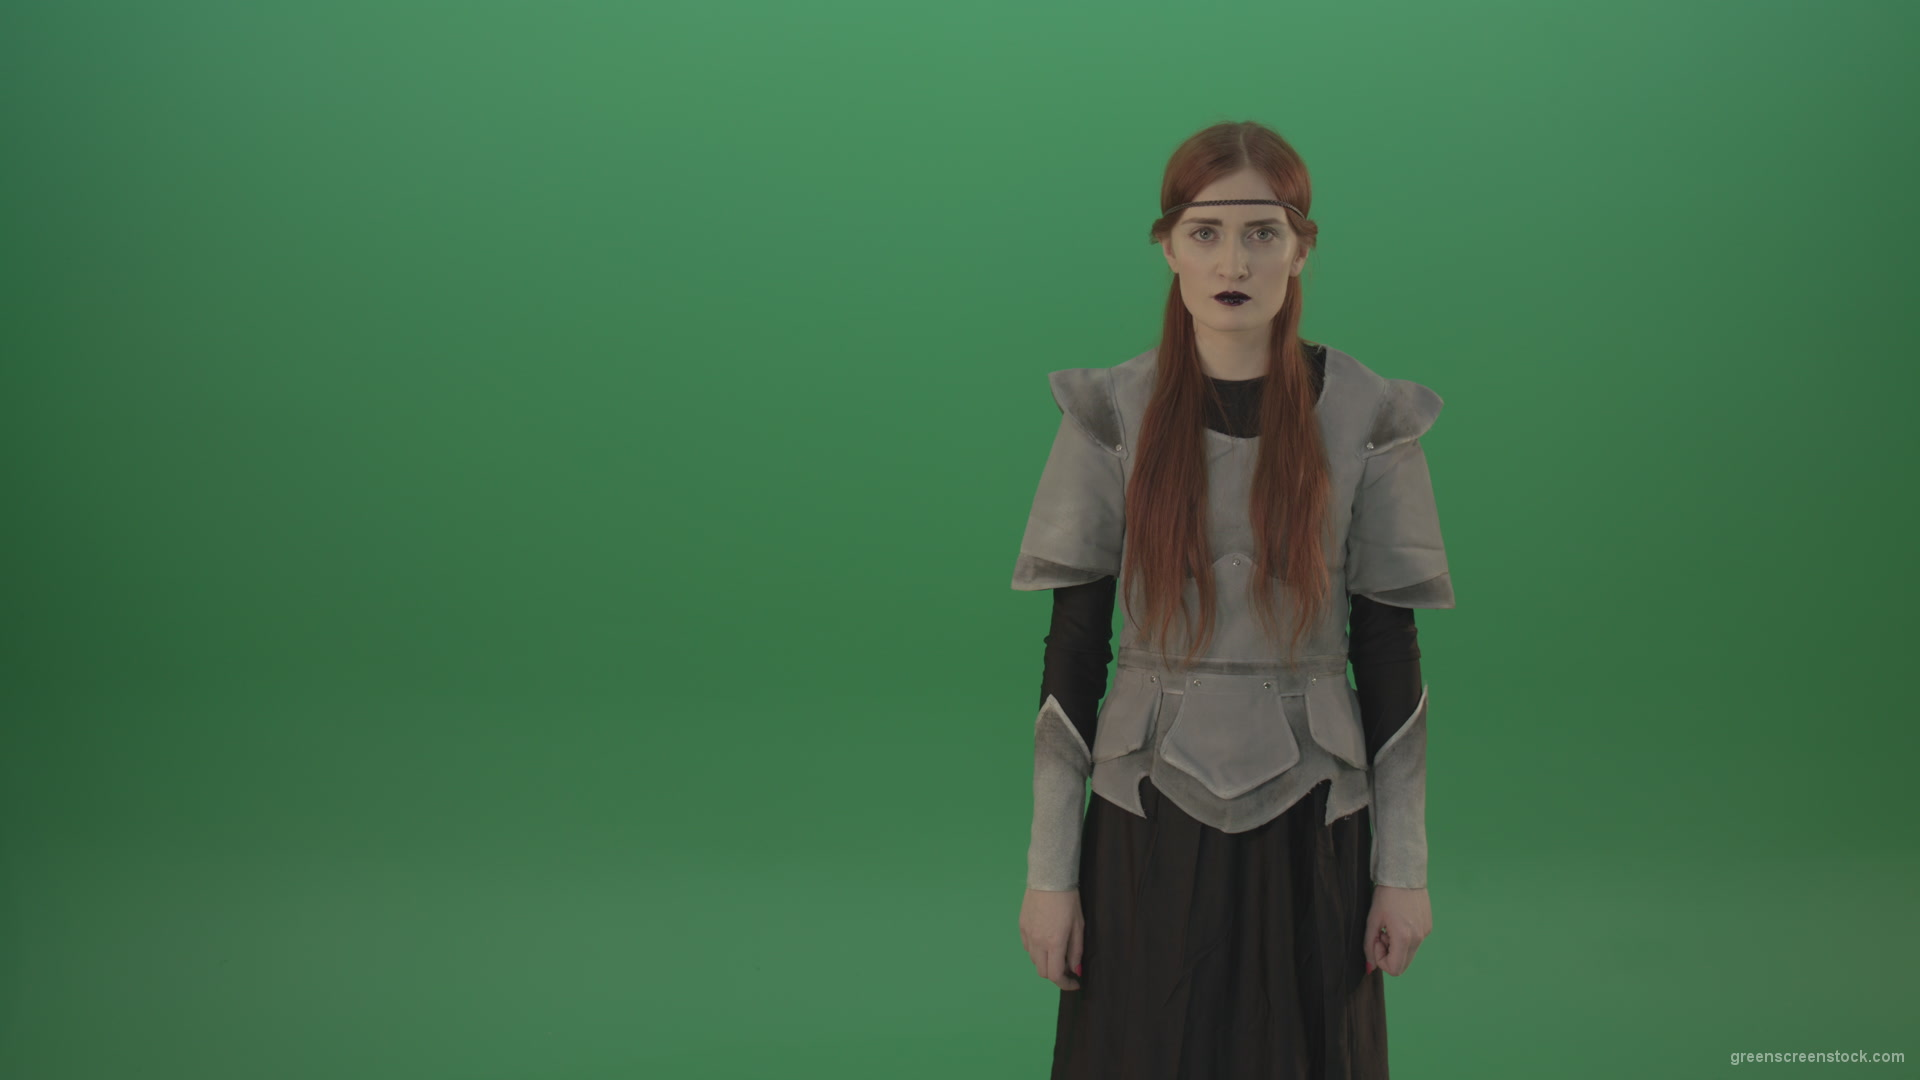 Witch-girl-watched-and-screamed-at-the-camera-with-green-eyes-on-a-green-background_001 Green Screen Stock